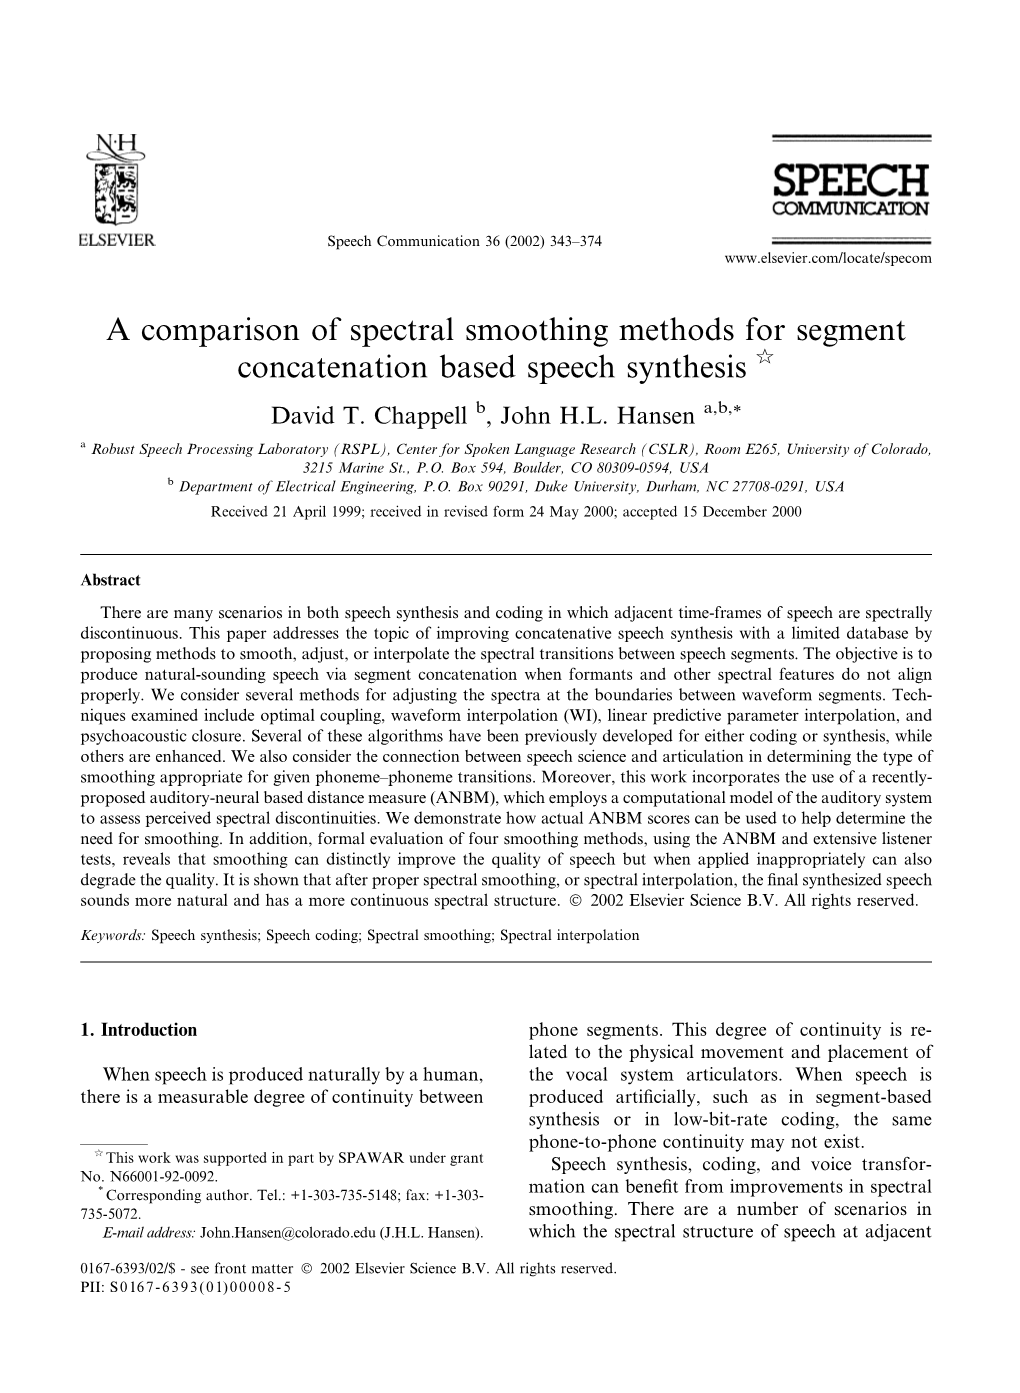 A Comparison of Spectral Smoothing Methods for Segment Concatenation Based Speech Synthesis Q David T